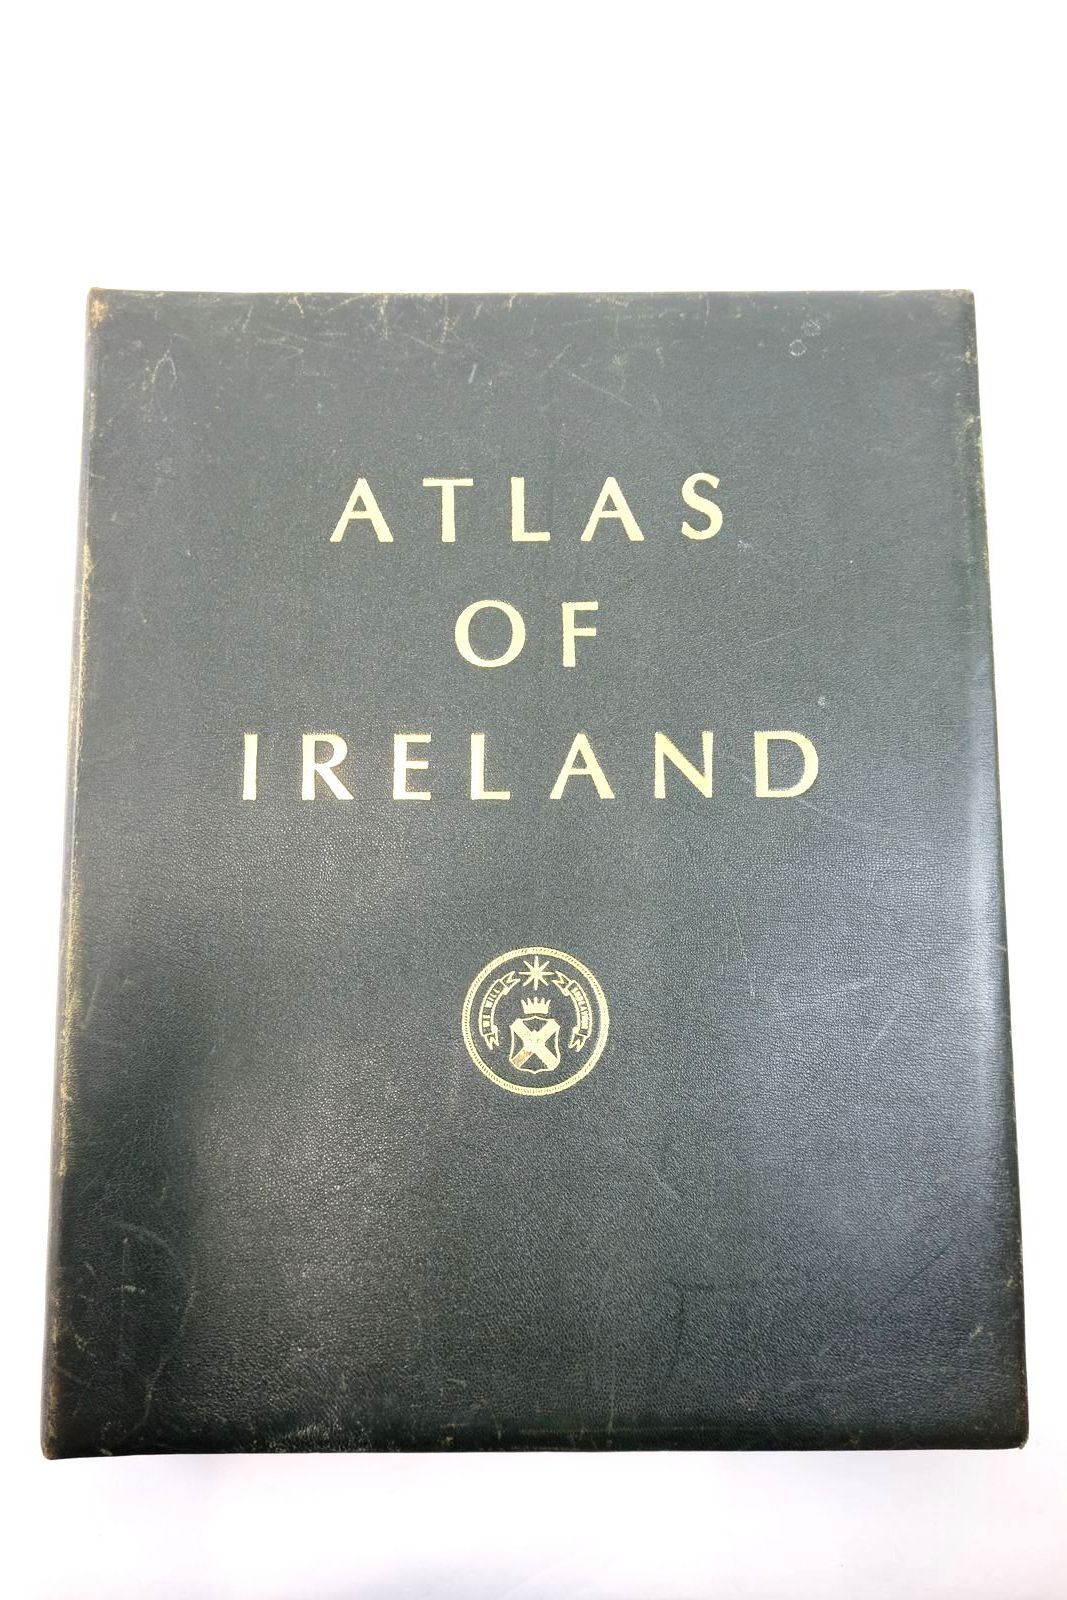 Photo of ATLAS OF IRELAND written by Mitchell, G.F.
Haughton, J.P. published by Royal Irish Academy (STOCK CODE: 2140854)  for sale by Stella & Rose's Books